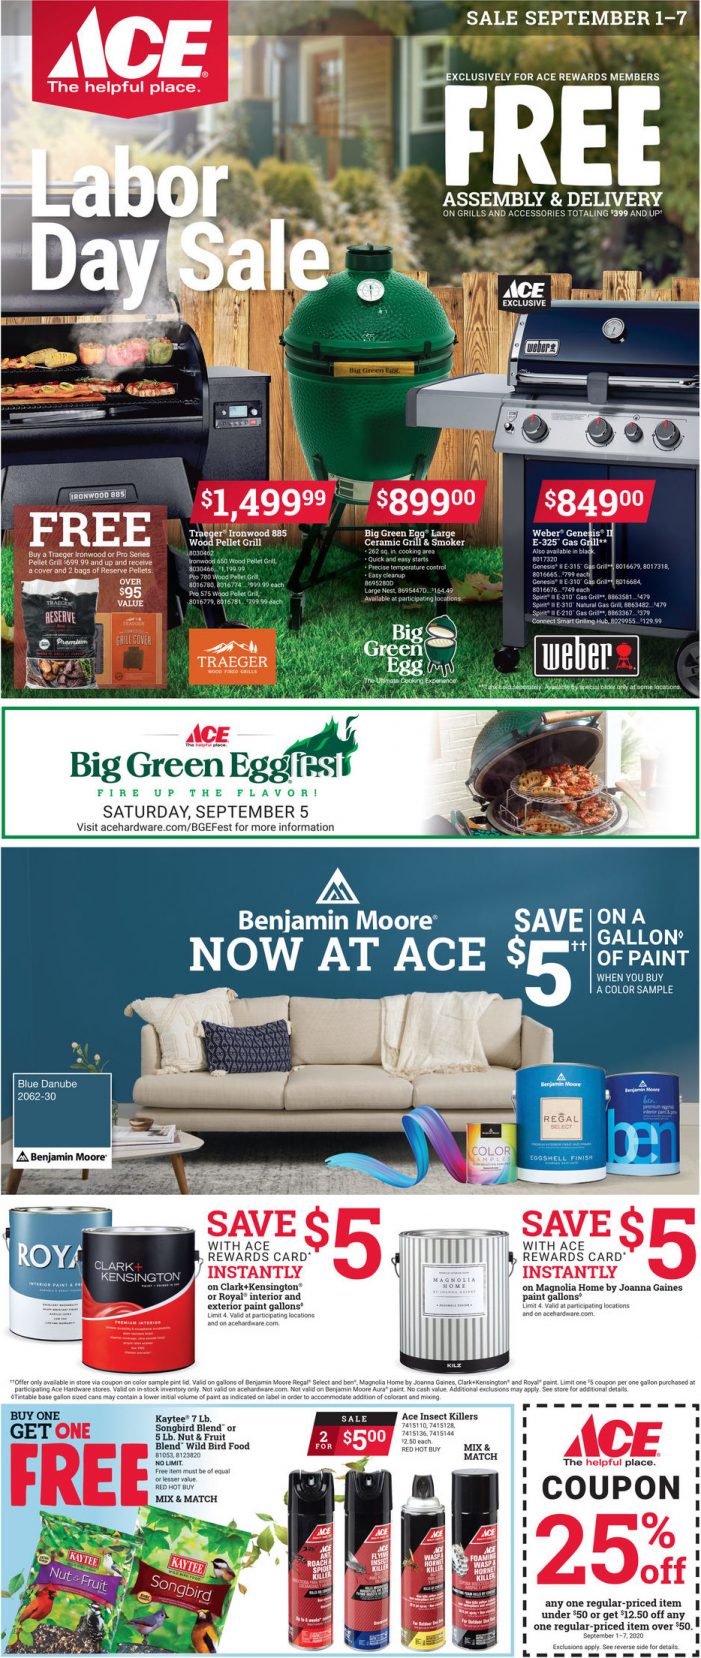 The Big Arnold Ace Home Center’s Labor Day Weekend Specials